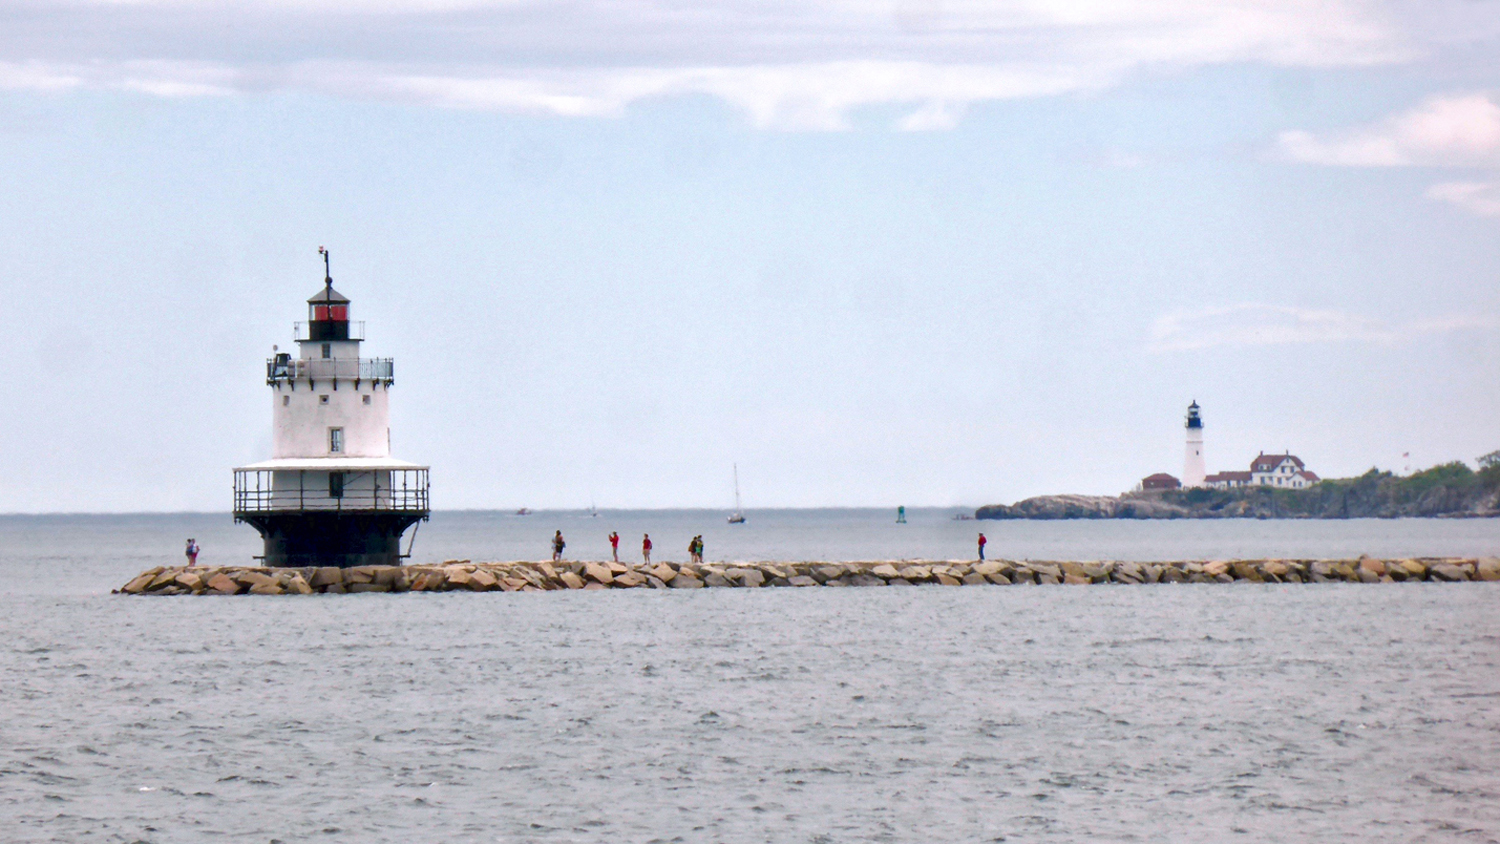 Spring Point Ledge Lighthouse with Portland Head Lighthouse in the background, Portland, Maine